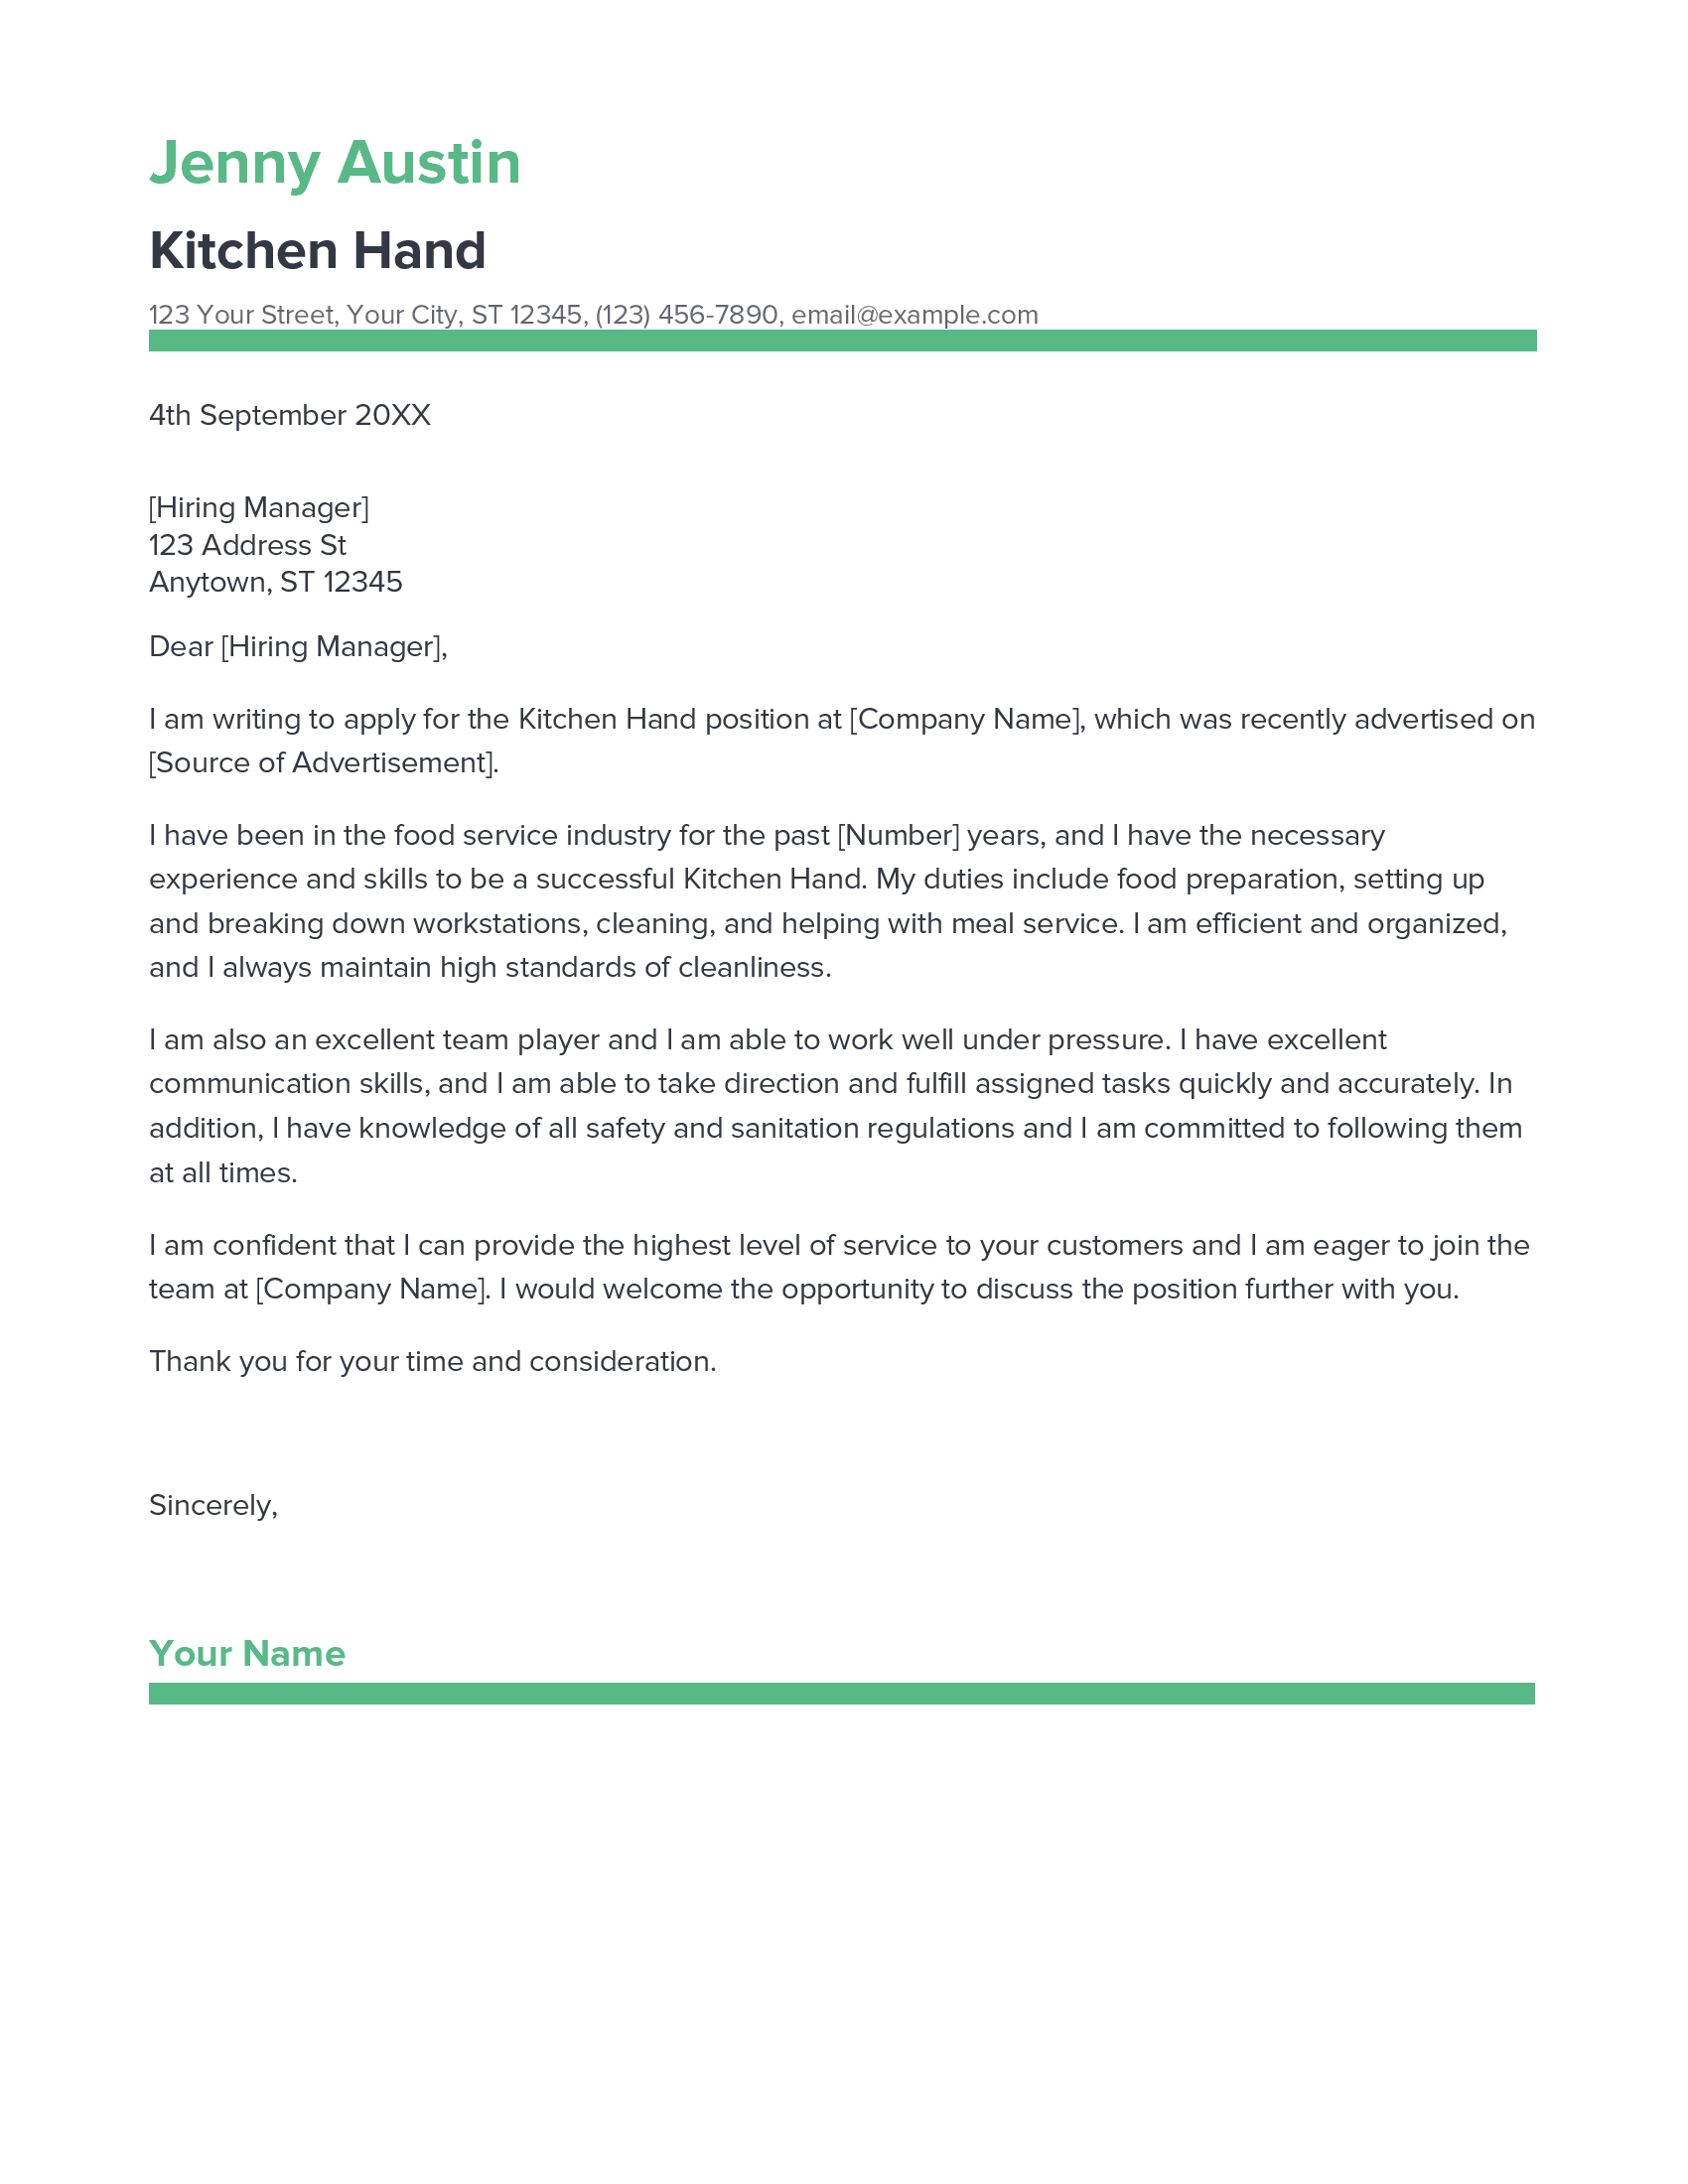 kitchen hand cover letter no experience